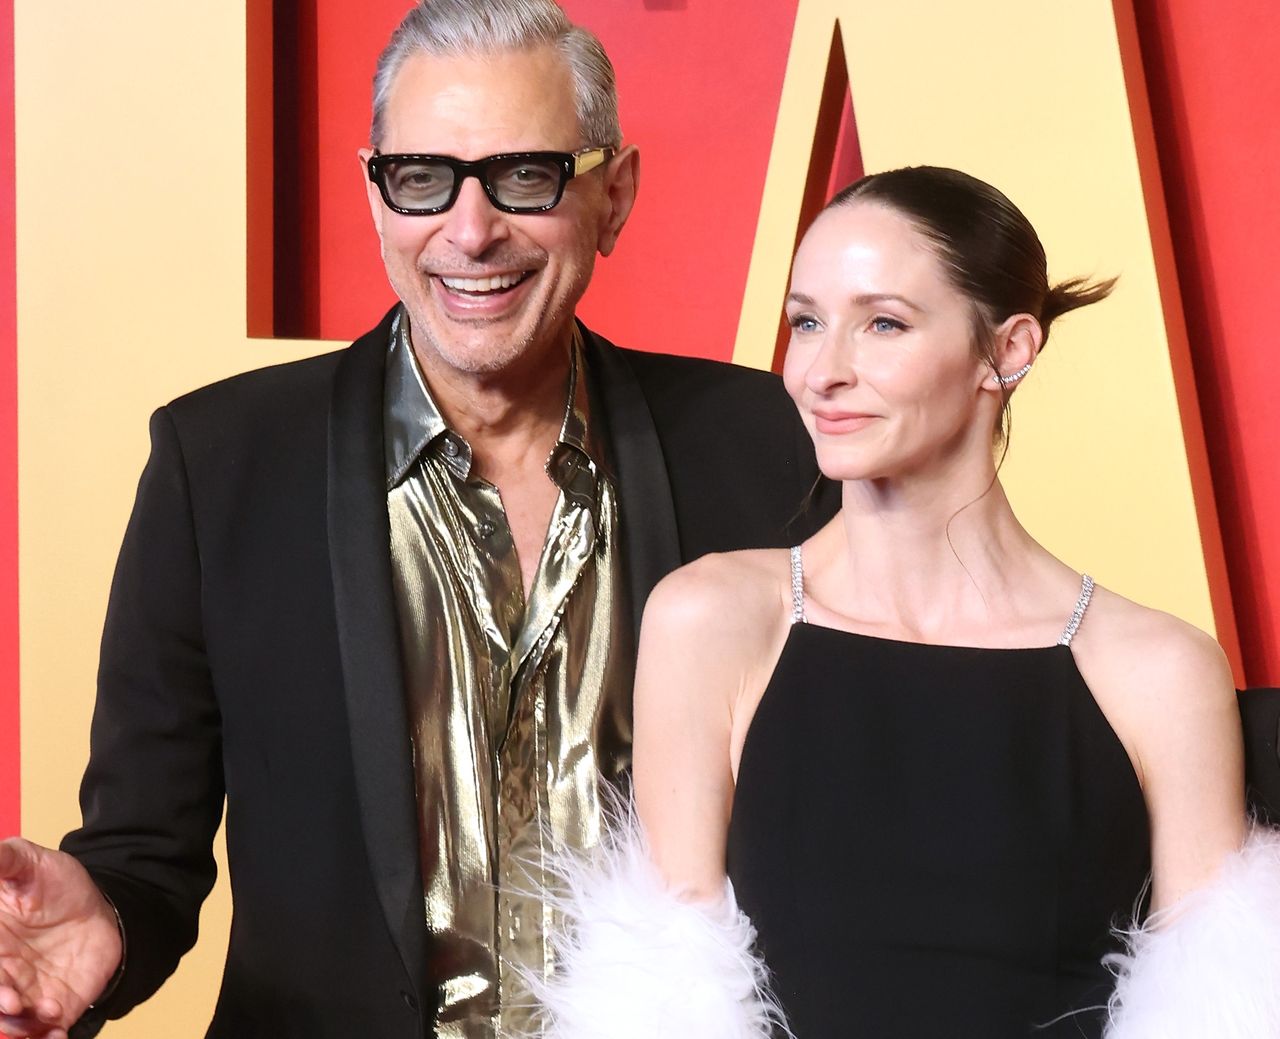 Jeff Goldblum with his wife at this year's Oscar party